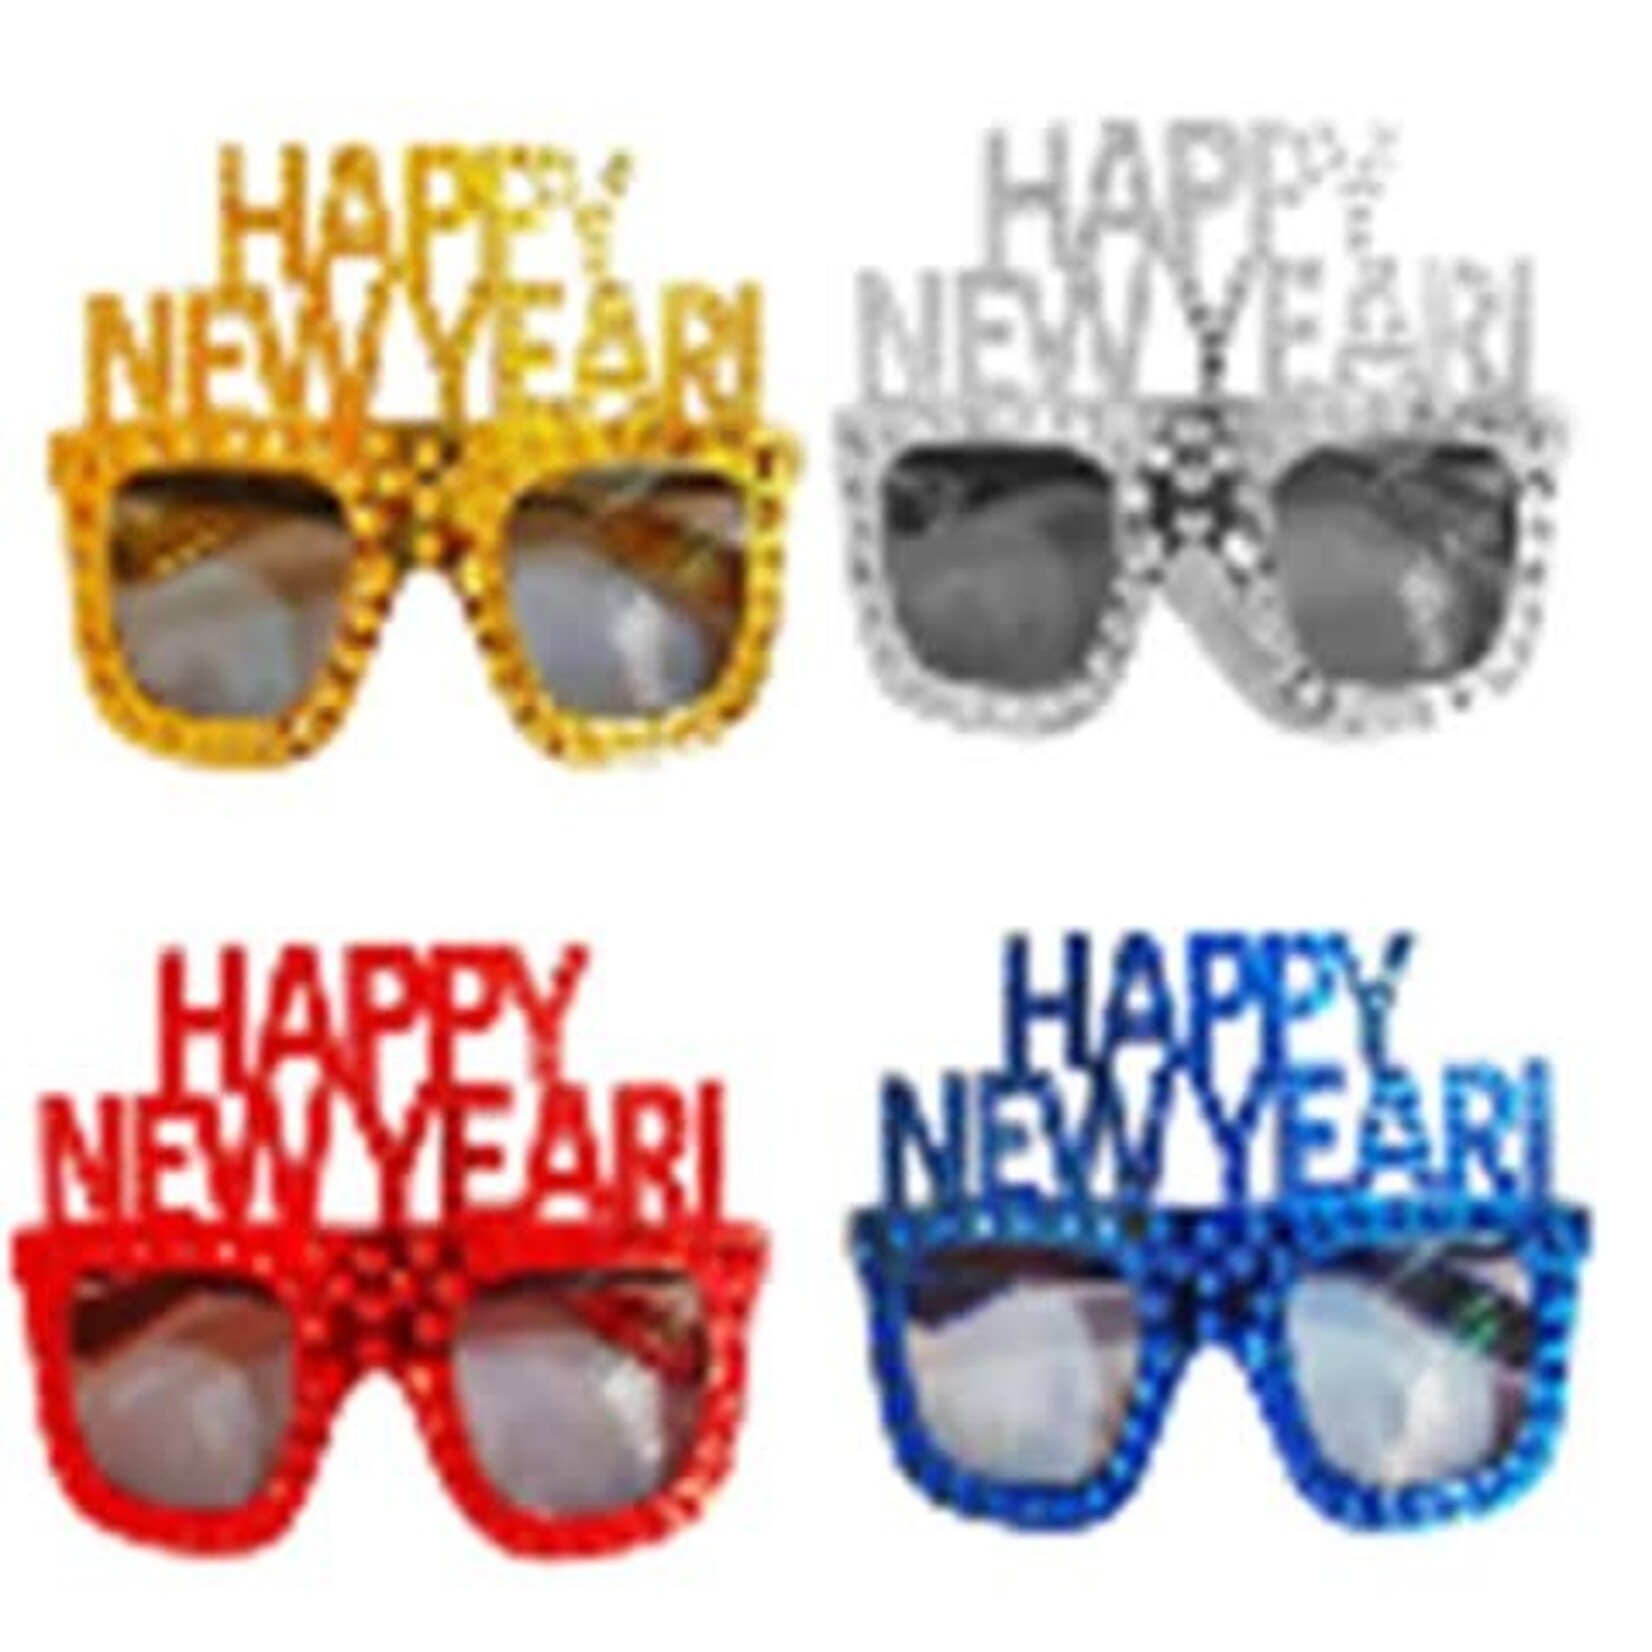 everbright Happy New Year Bedazzled Glasses - 1ct. (Assorted Colors)